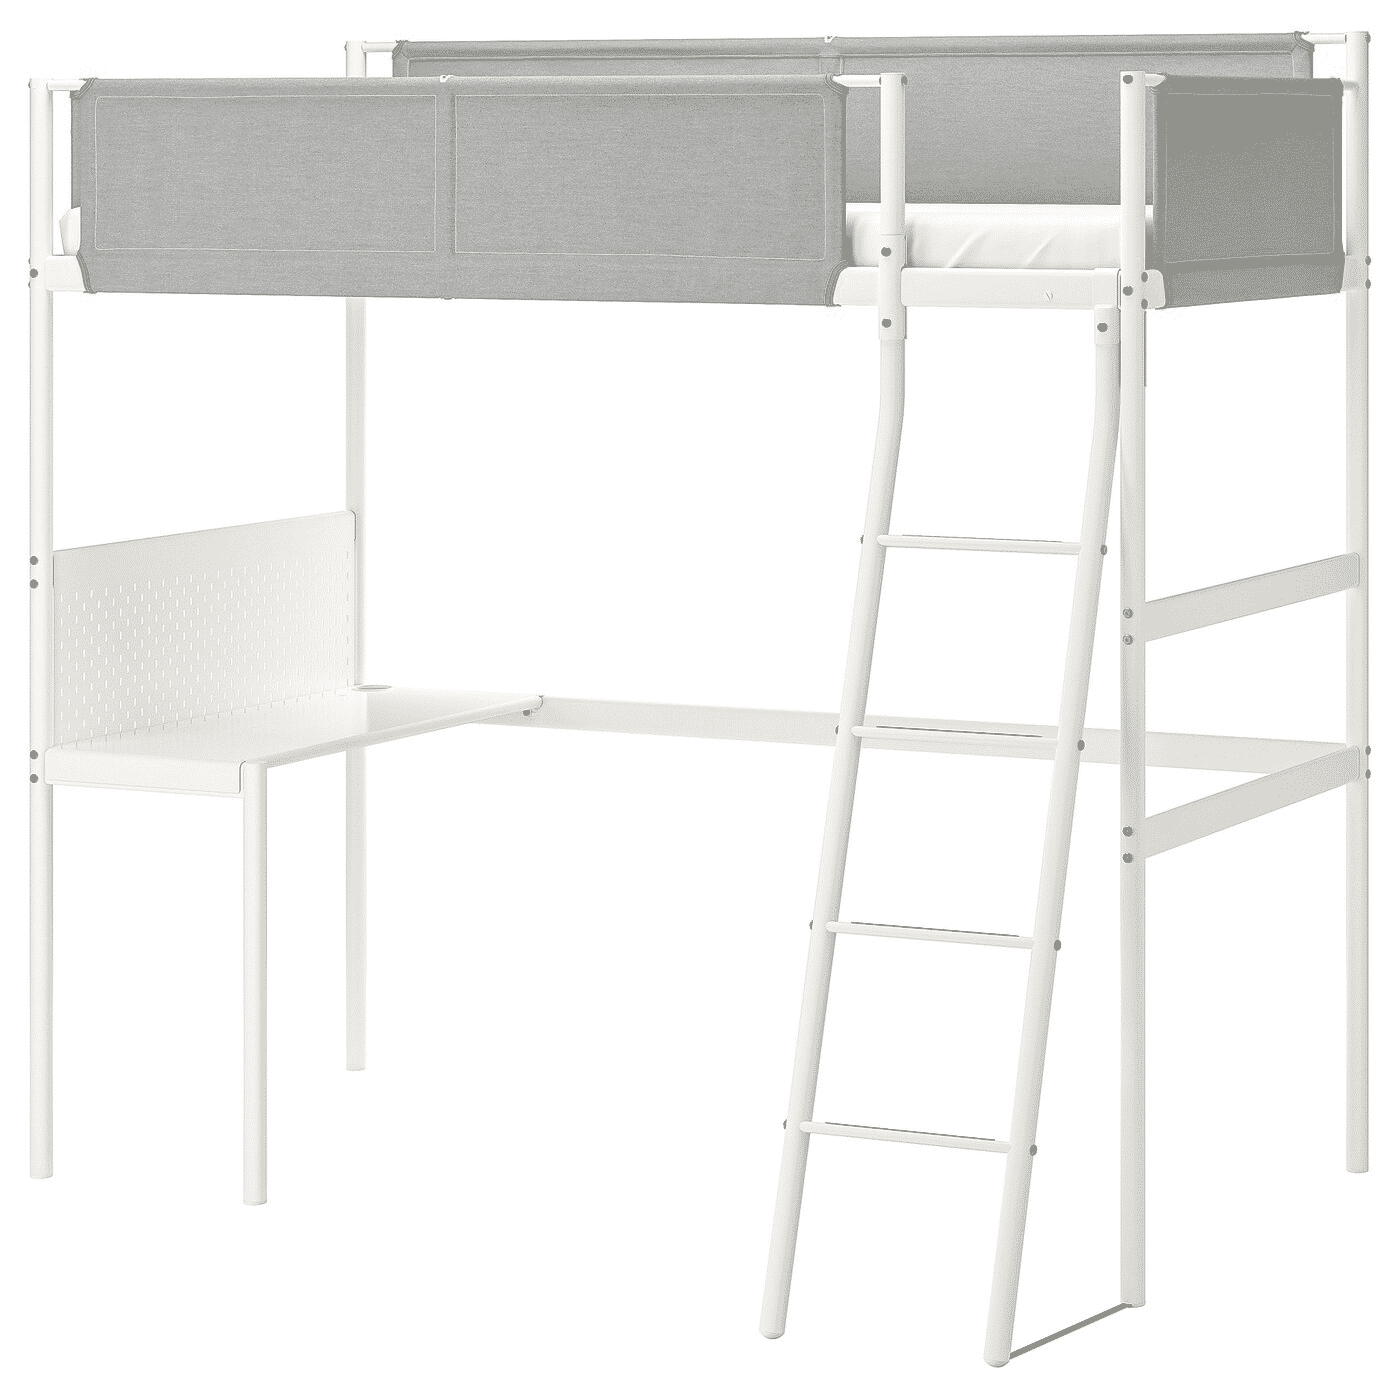 4 Best Ikea Loft Bed With Desk Review 21 Ikea Product Reviews